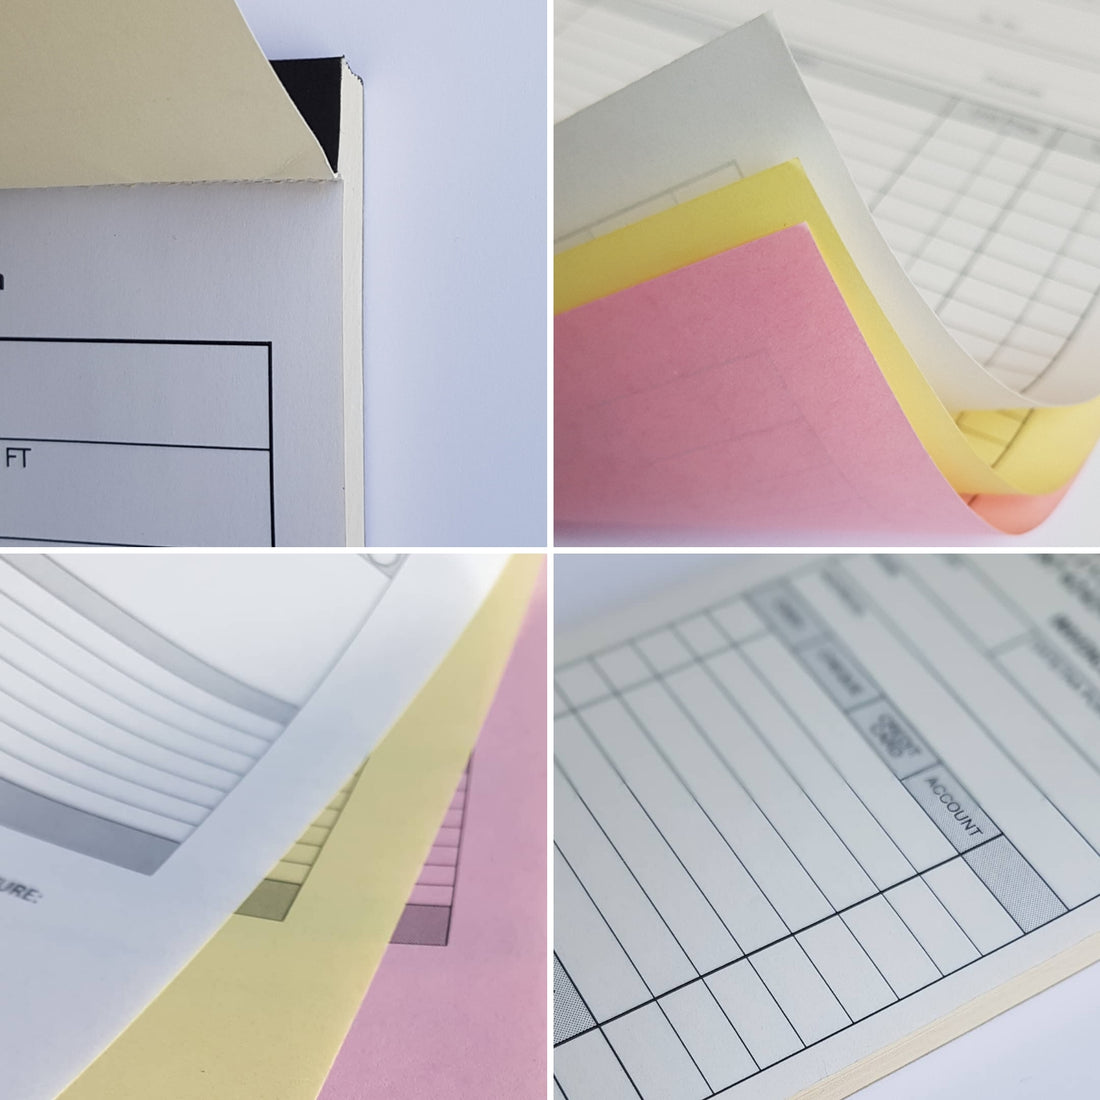 10 Reasons Why You Should Order Bespoke Printed NCR Carbonless Forms from MD Print Shop